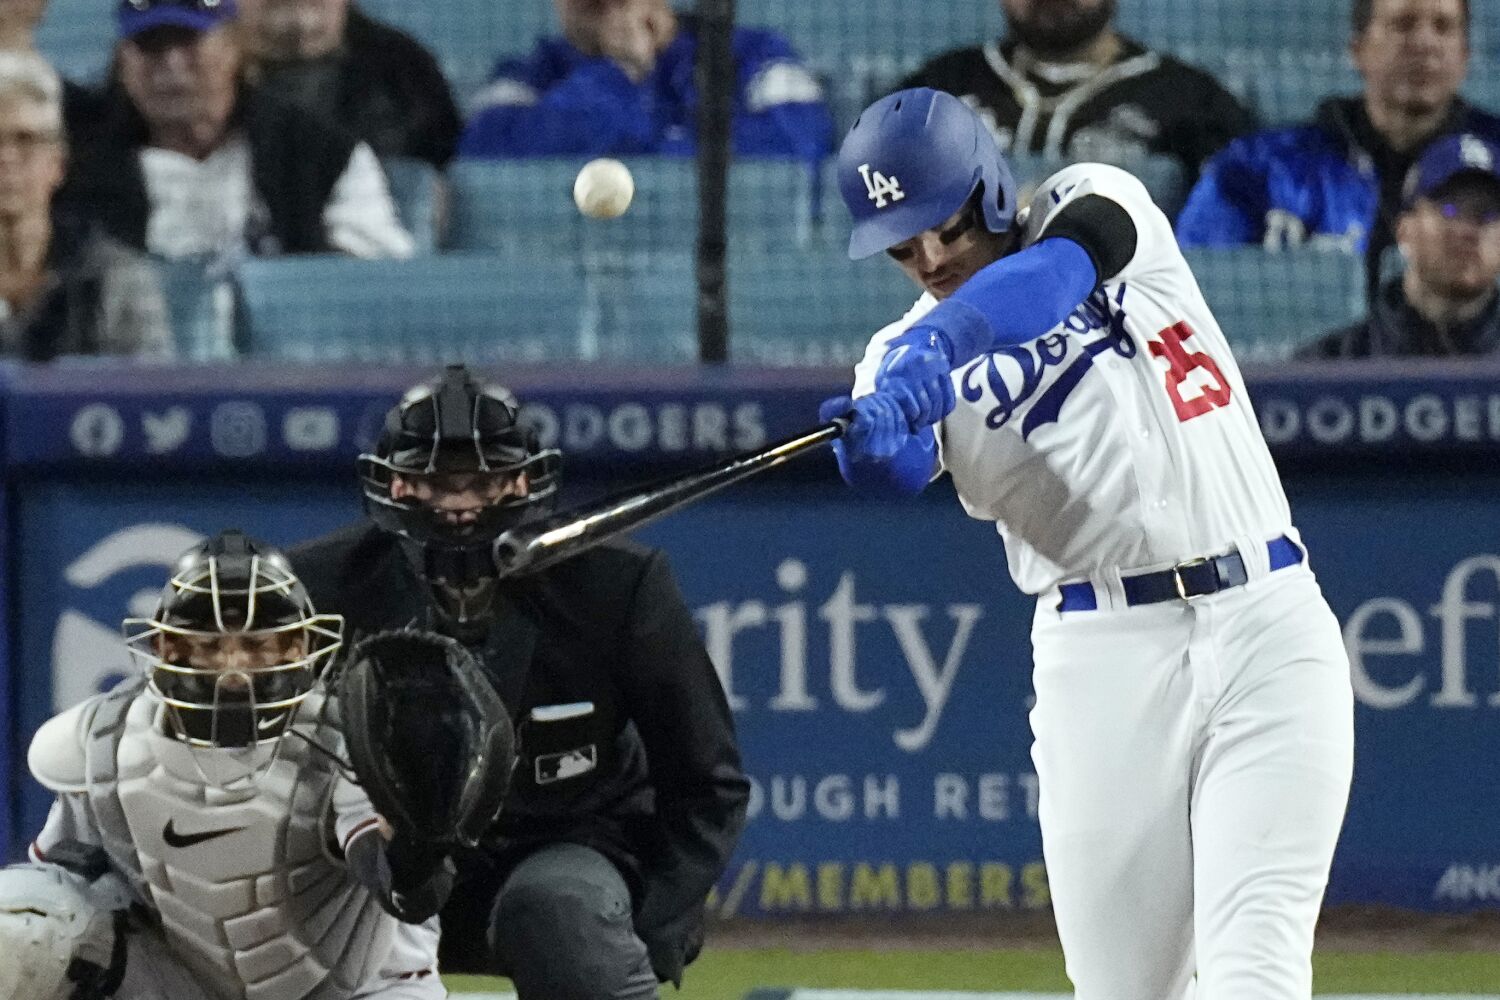 Trayce Thompson's three-homer game rekindles a confidence he never lost